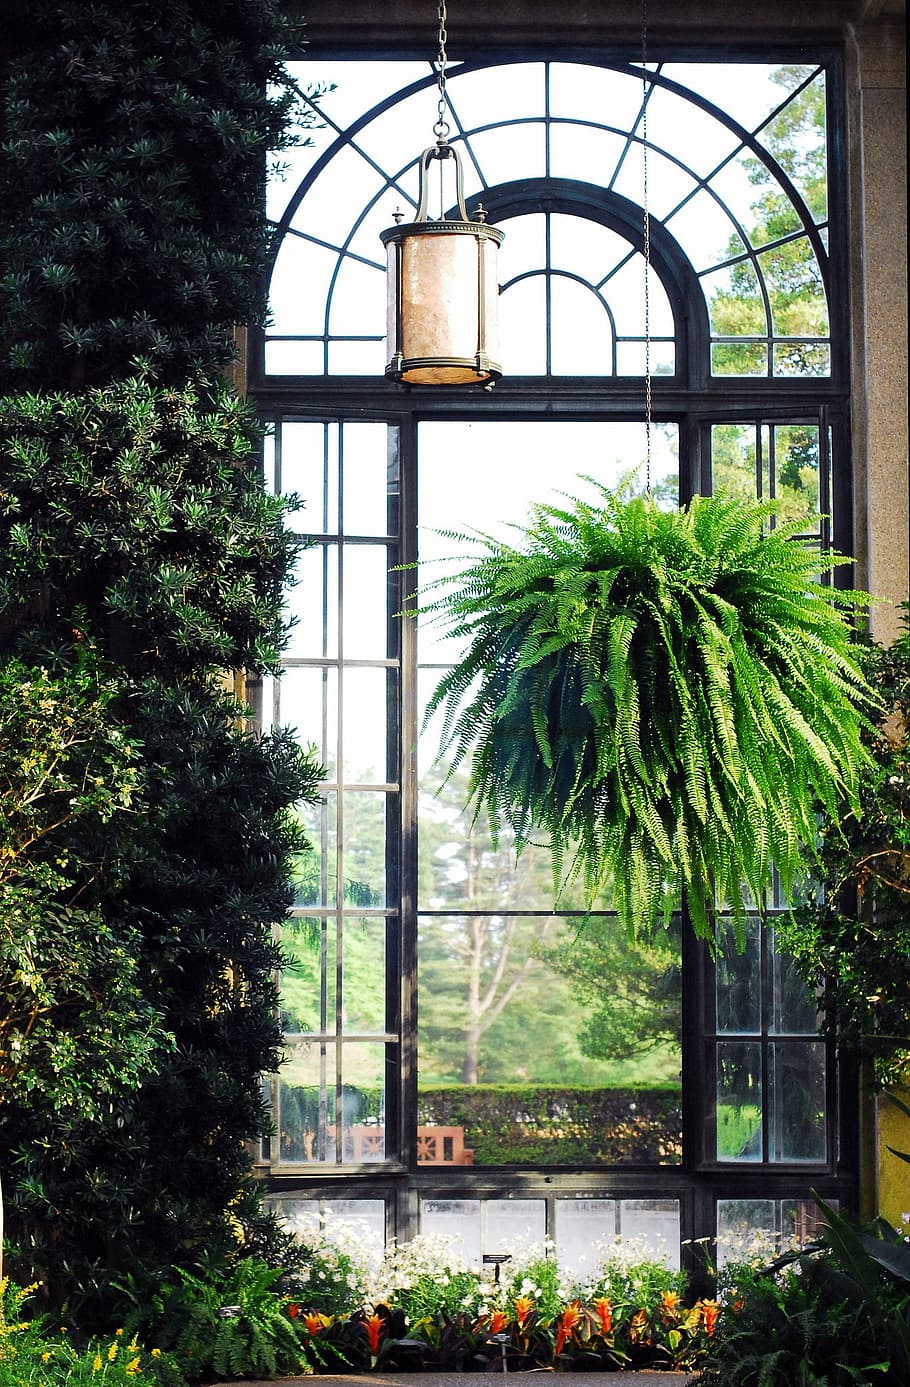 green, leafed, plant, hanging, window, longwood, gardens, conservatory, greenhouse, tree